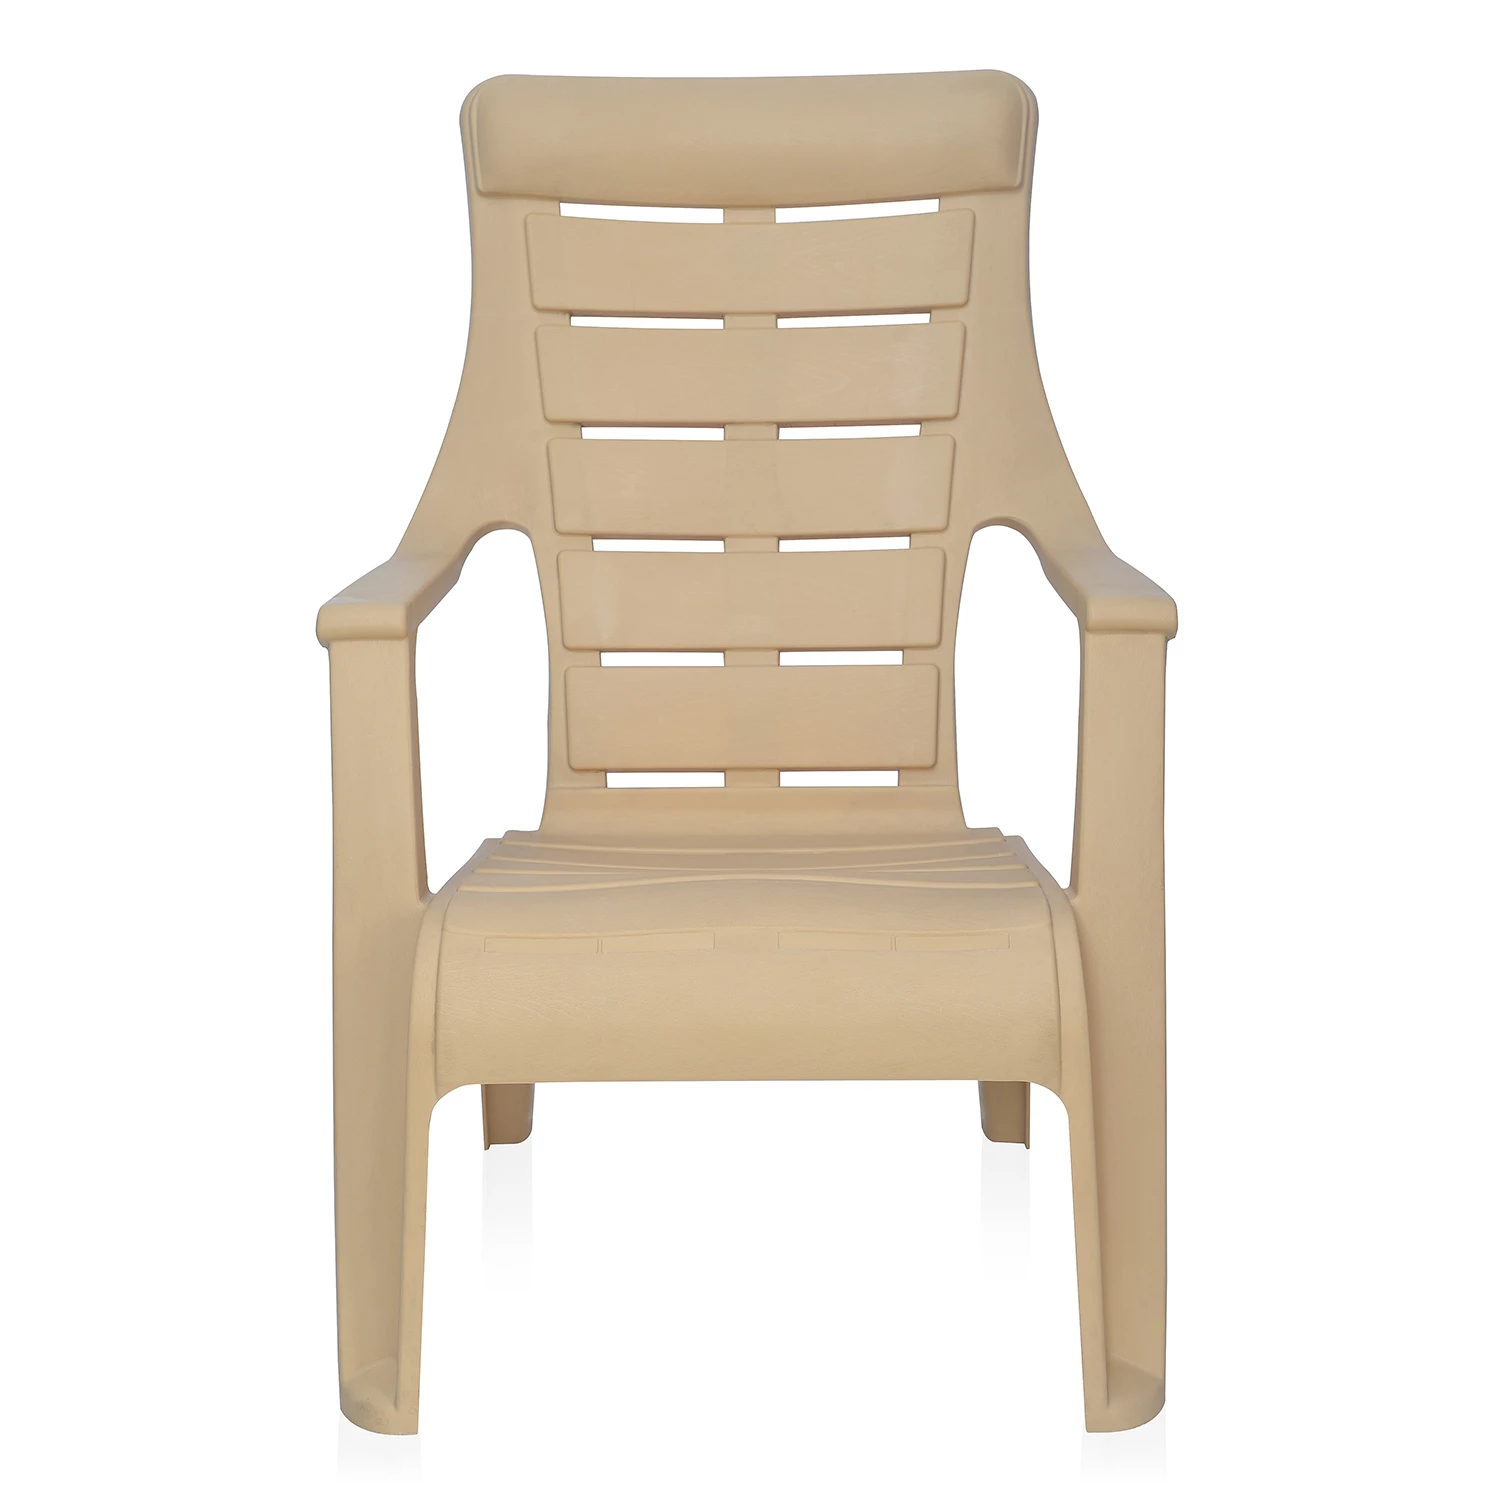 15 Best Quality Plastic Chairs in India 2022 (Top 5)